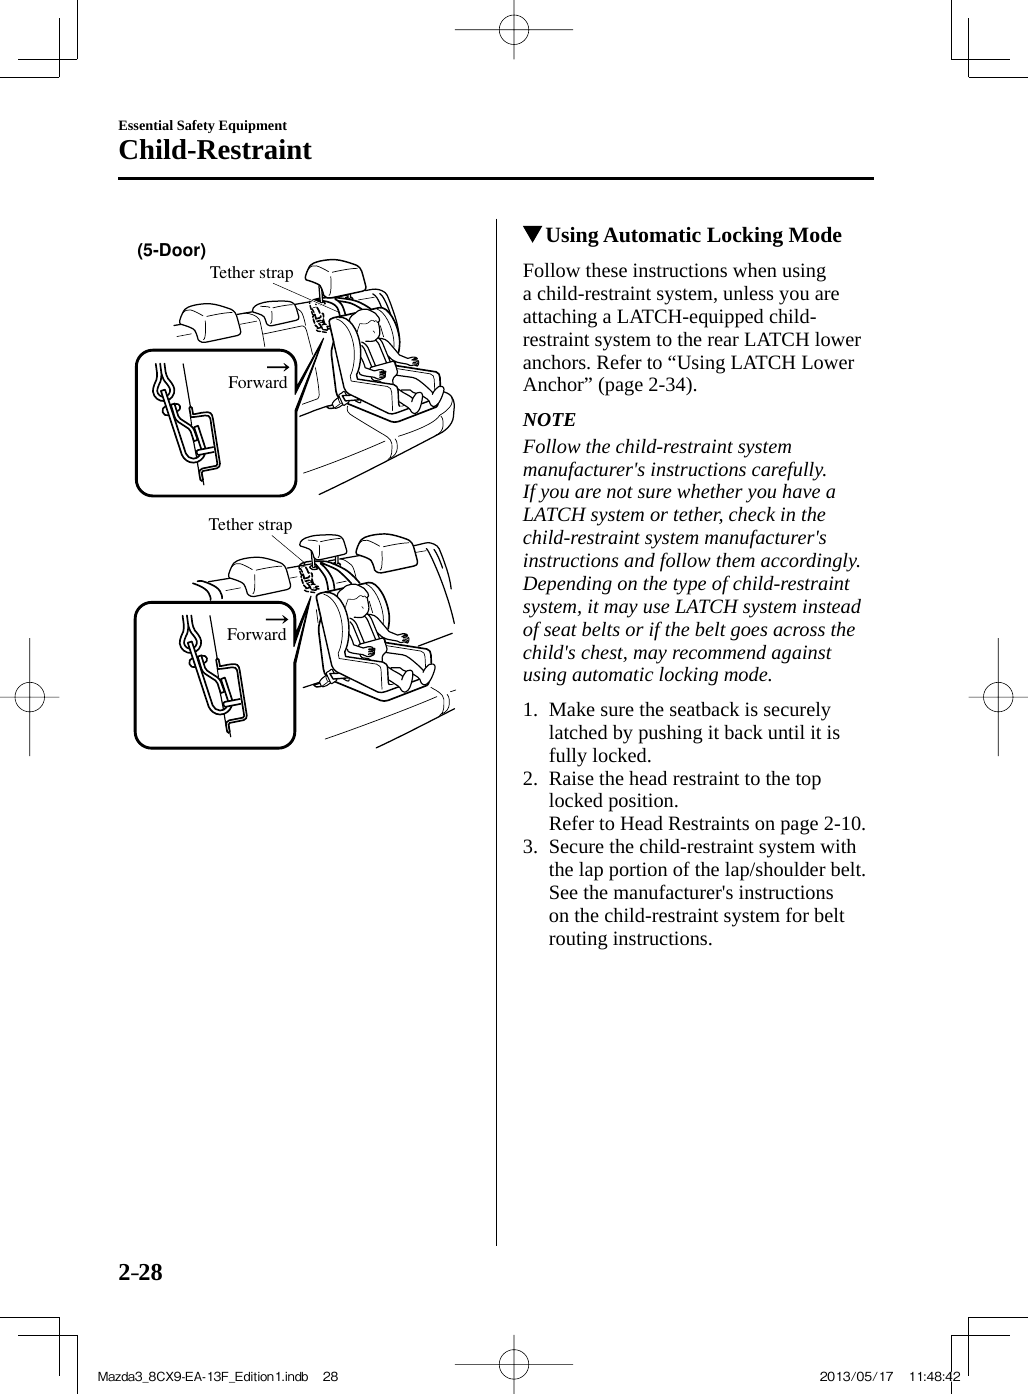 2–28Essential Safety EquipmentChild-Restraint Tether strapForward(5-Door)  Tether strapForward              Using Automatic Locking Mode    Follow  these  instructions  when  using a child-restraint system, unless you are attaching a LATCH-equipped child-restraint system to the rear LATCH lower anchors. Refer to “Using LATCH Lower Anchor” (page  2-34 ).   NOTE  Follow the child-restraint system manufacturer&apos;s instructions carefully. If you are not sure whether you have a LATCH system or tether, check in the child-restraint system manufacturer&apos;s instructions and follow them accordingly. Depending on the type of child-restraint system, it may use LATCH system instead of seat belts or if the belt goes across the child&apos;s chest, may recommend against using automatic locking mode.      1.   Make sure the seatback is securely latched by pushing it back until it is fully locked.   2.   Raise the head restraint to the top locked position.    Refer to Head Restraints on page  2-10 .   3.   Secure  the  child-restraint  system  with the lap portion of the lap/shoulder belt. See the manufacturer&apos;s instructions on the child-restraint system for belt routing instructions.Mazda3_8CX9-EA-13F_Edition1.indb   28Mazda3_8CX9-EA-13F_Edition1.indb   28 2013/05/17   11:48:422013/05/17   11:48:42